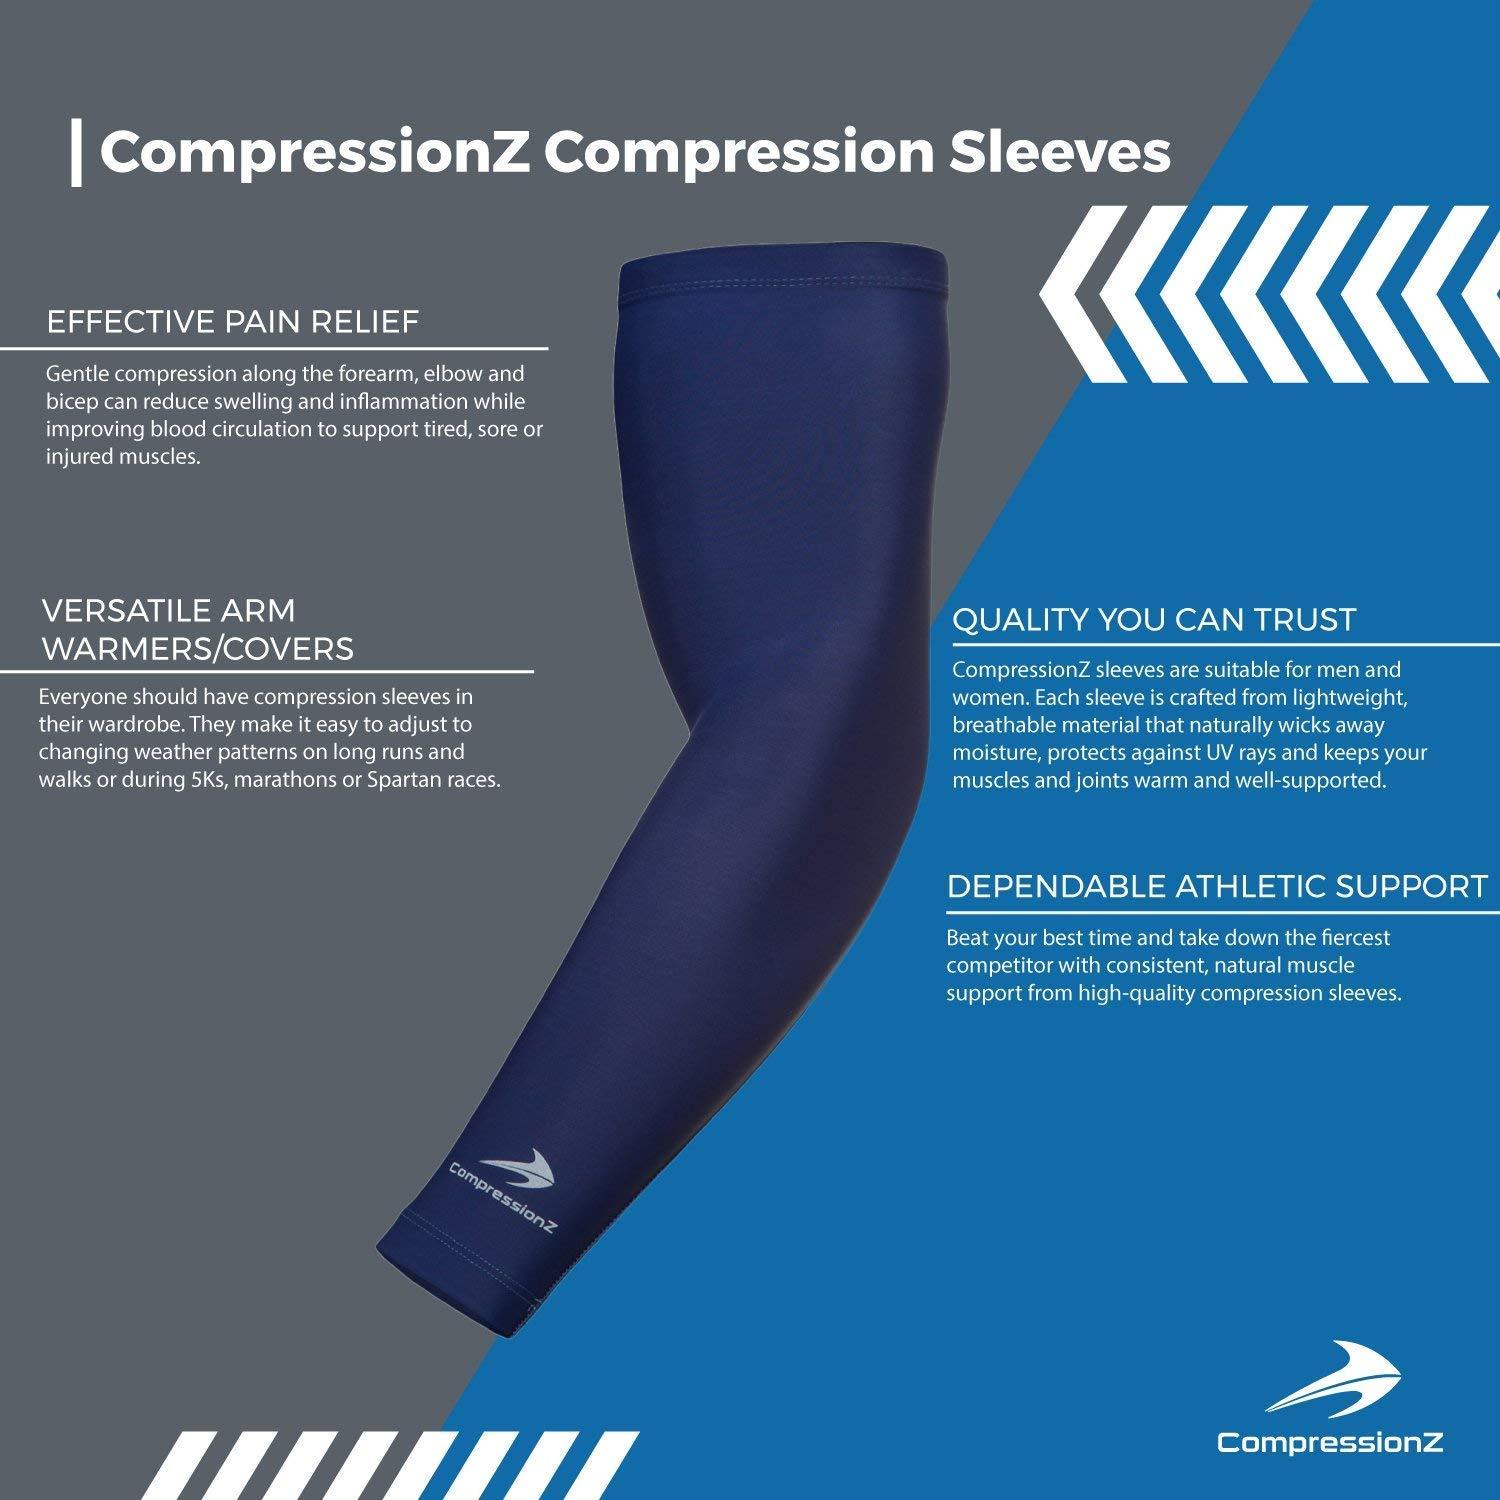 Youth Arm Sleeves (2 Sleeves) - Navy